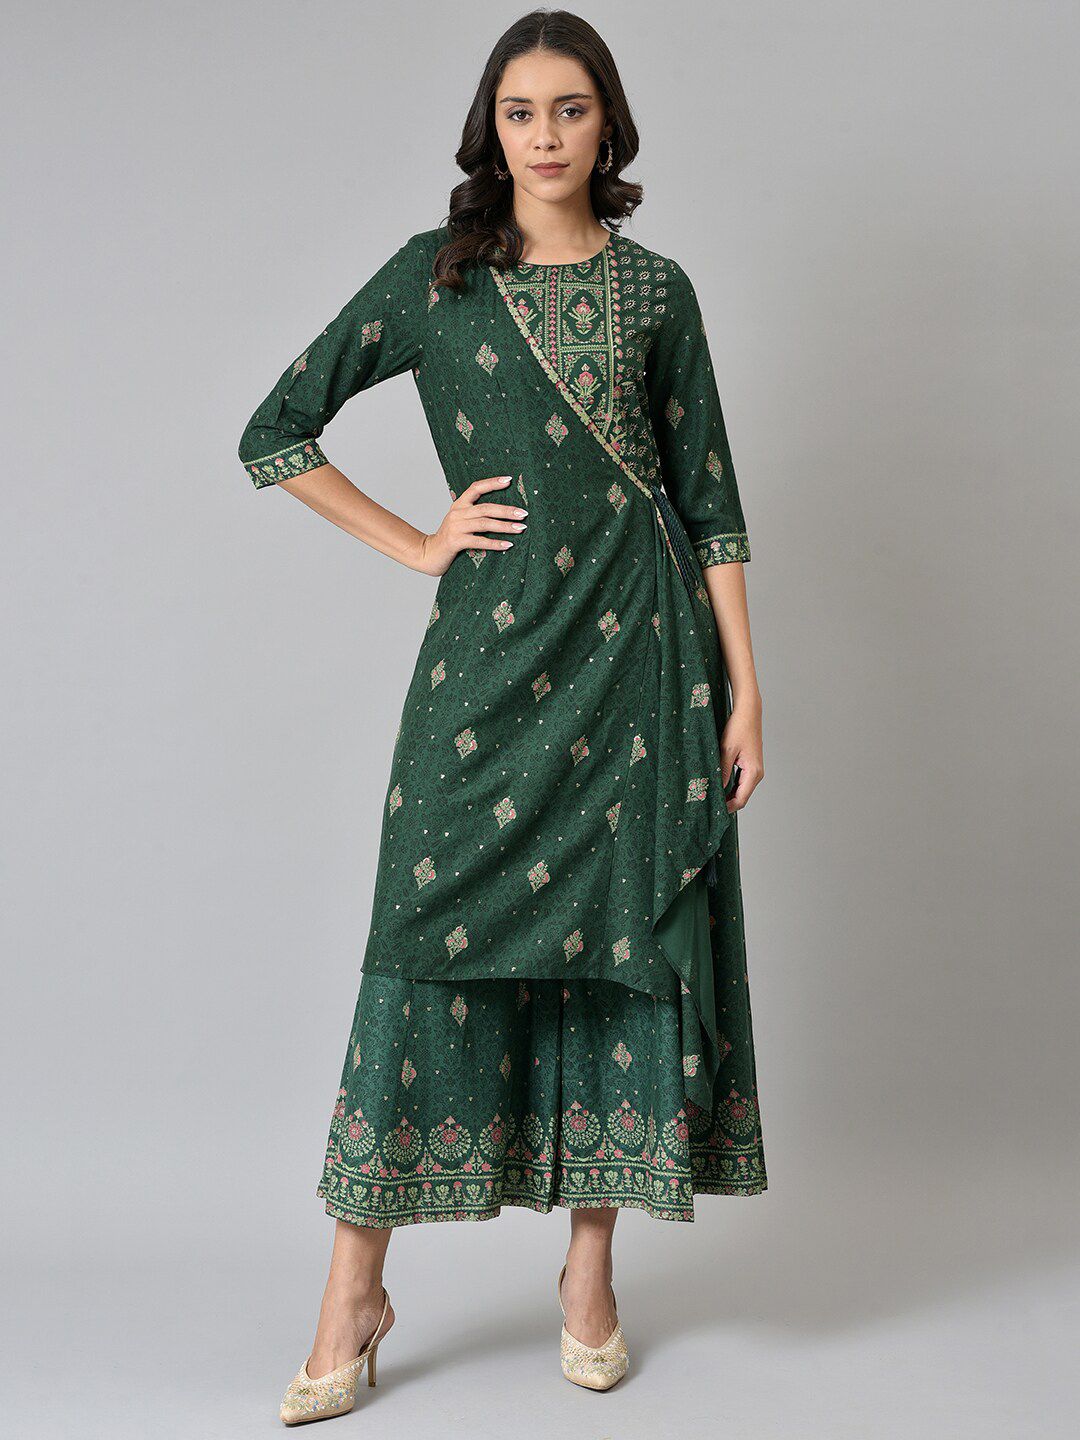 W Women Green Glitter Printed Angrakha Jumpsuit Price in India